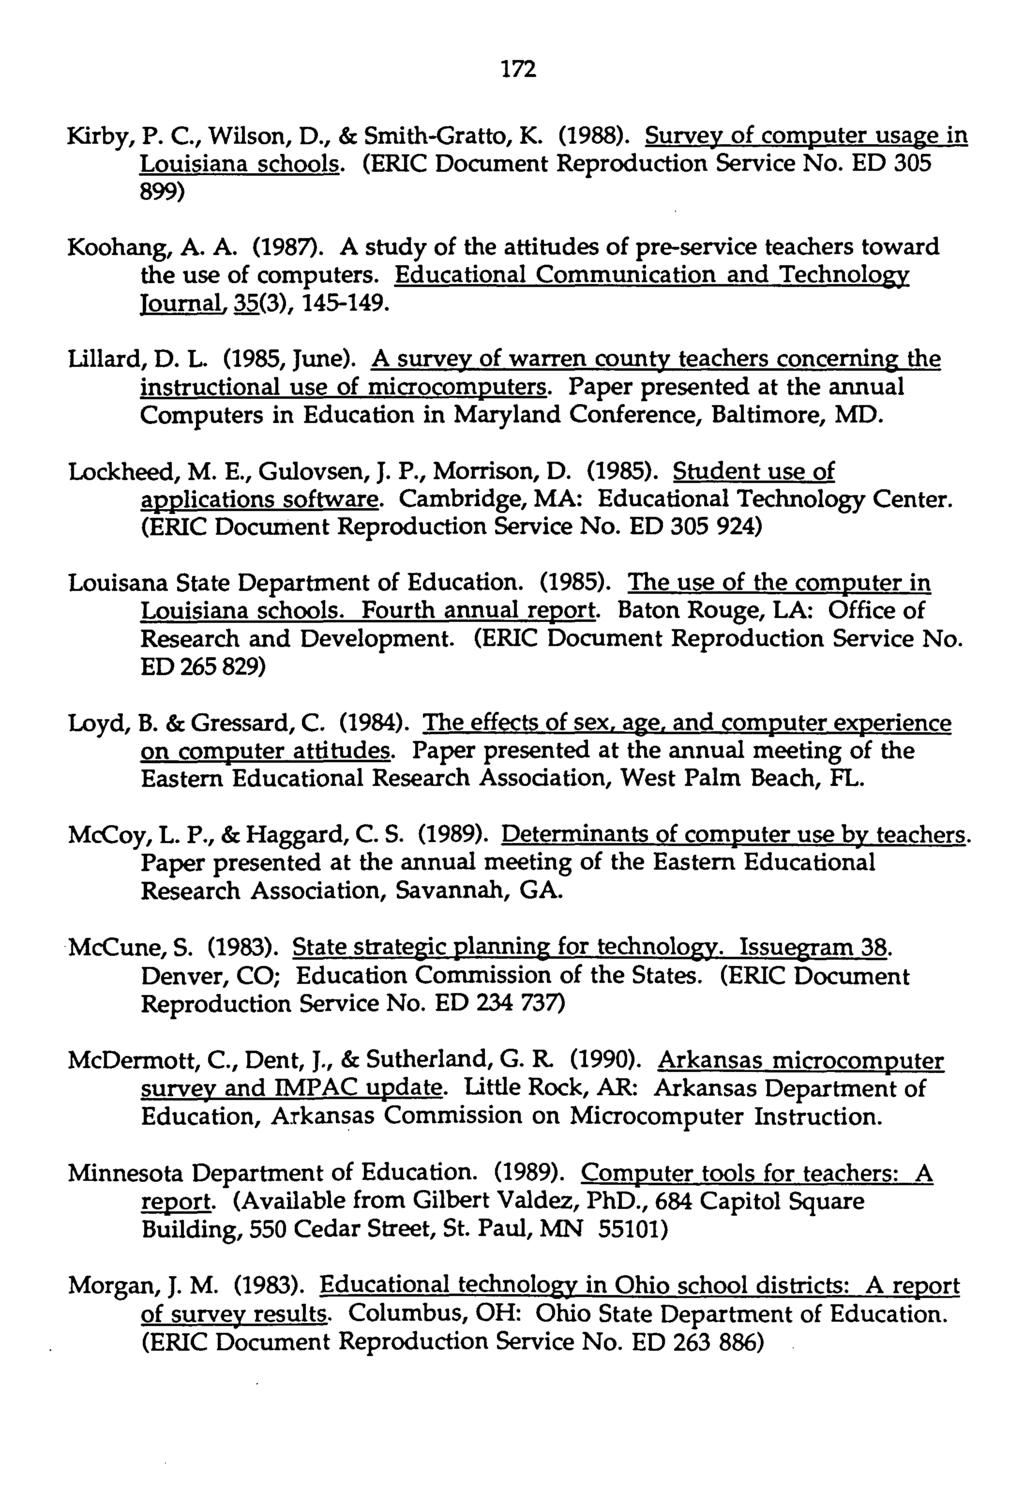 172 Kirby, P. C., Wilson, D., & Smith-Gratto, K. (1988). Survey of computer usage in Louisiana schools. (ERIC Document Reproduction Service No. ED 305 899) Koohang, A. A. (1987).